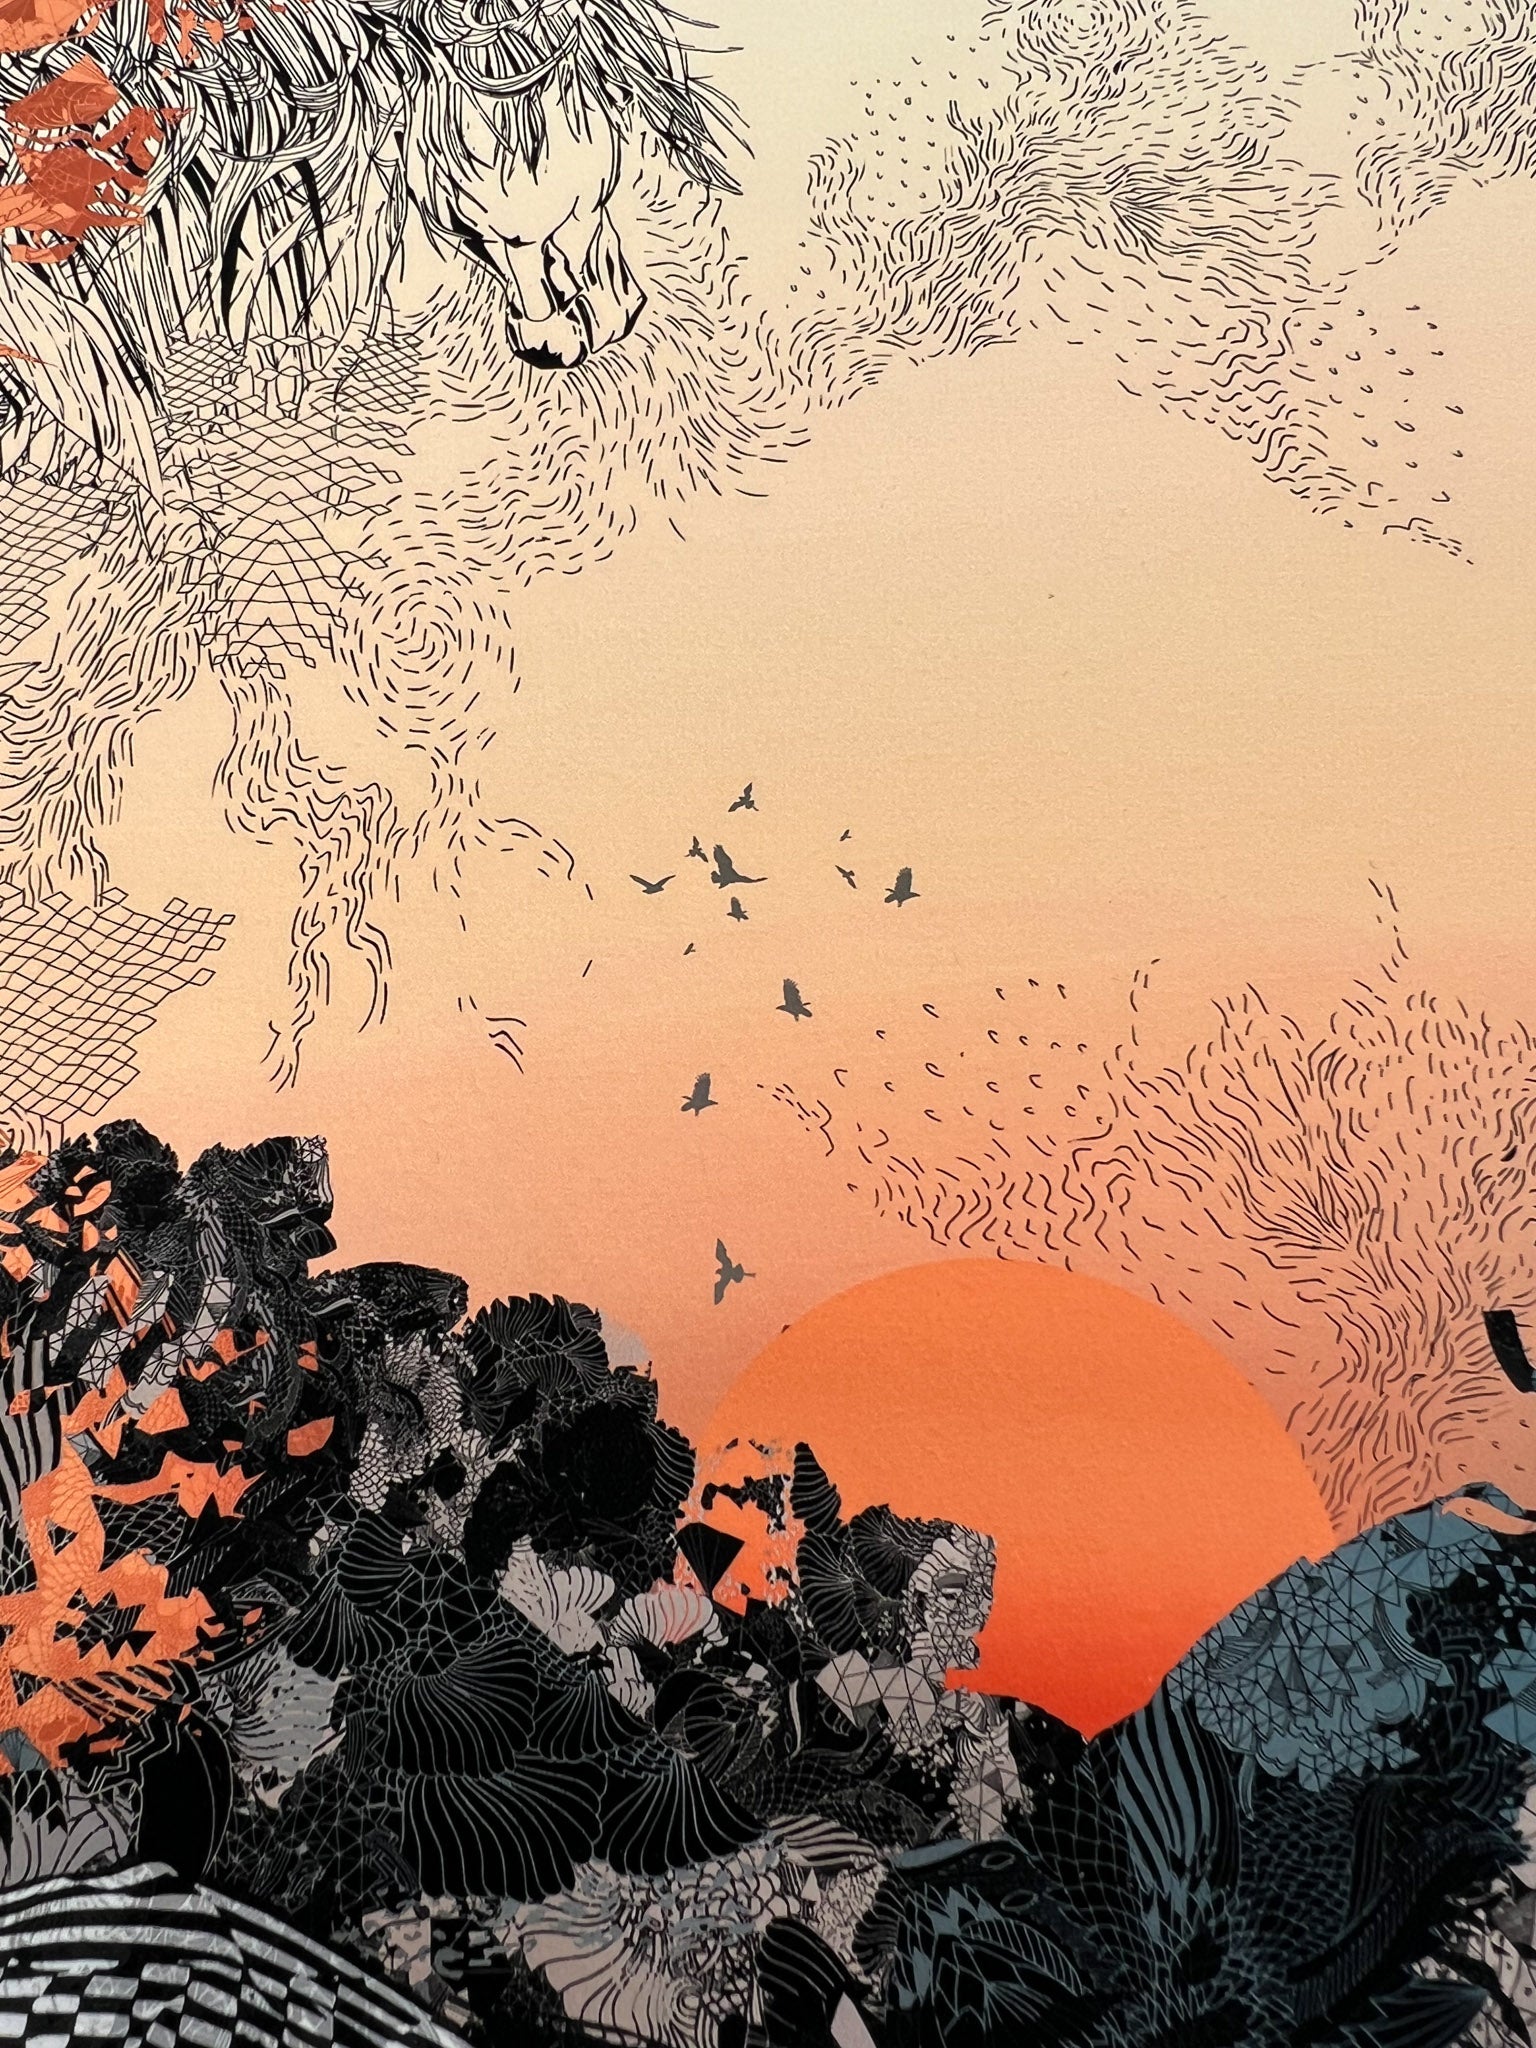 A close up of a giclee print with Sunrise design in oranges and blacks